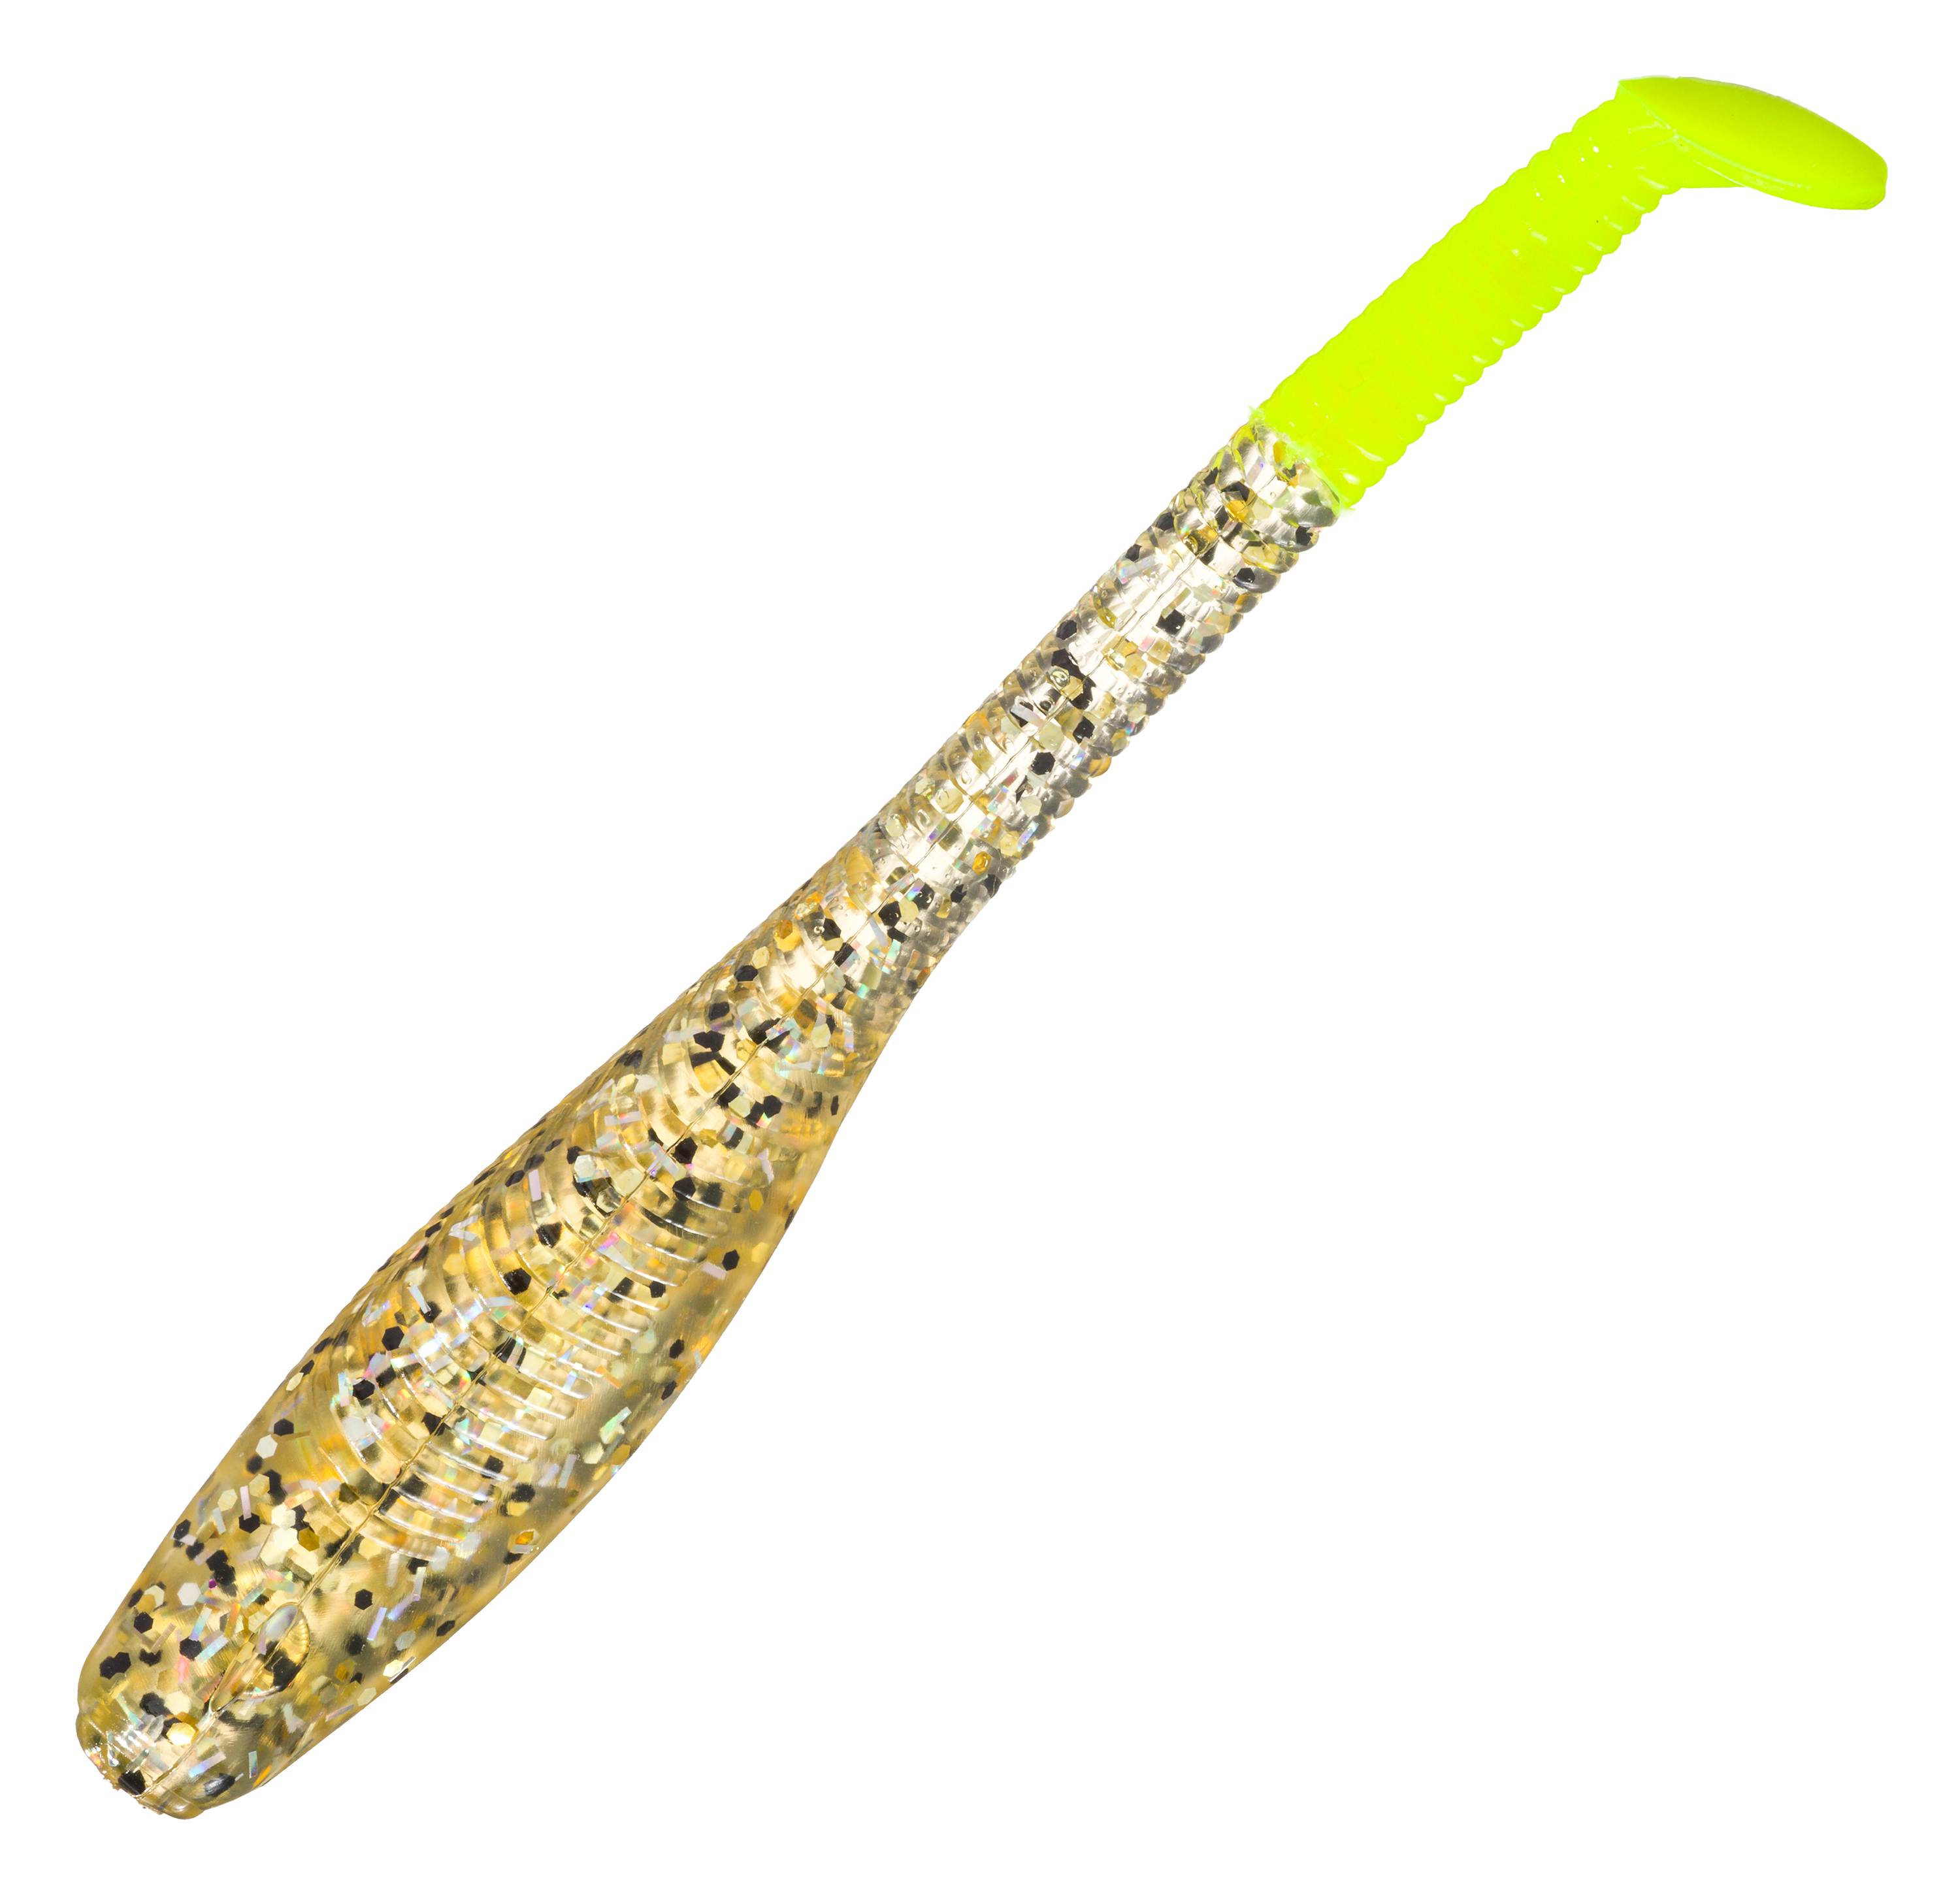 01 - Down South Lures Saltwater Paddletail Swimbait - Chartreuse  850728005029